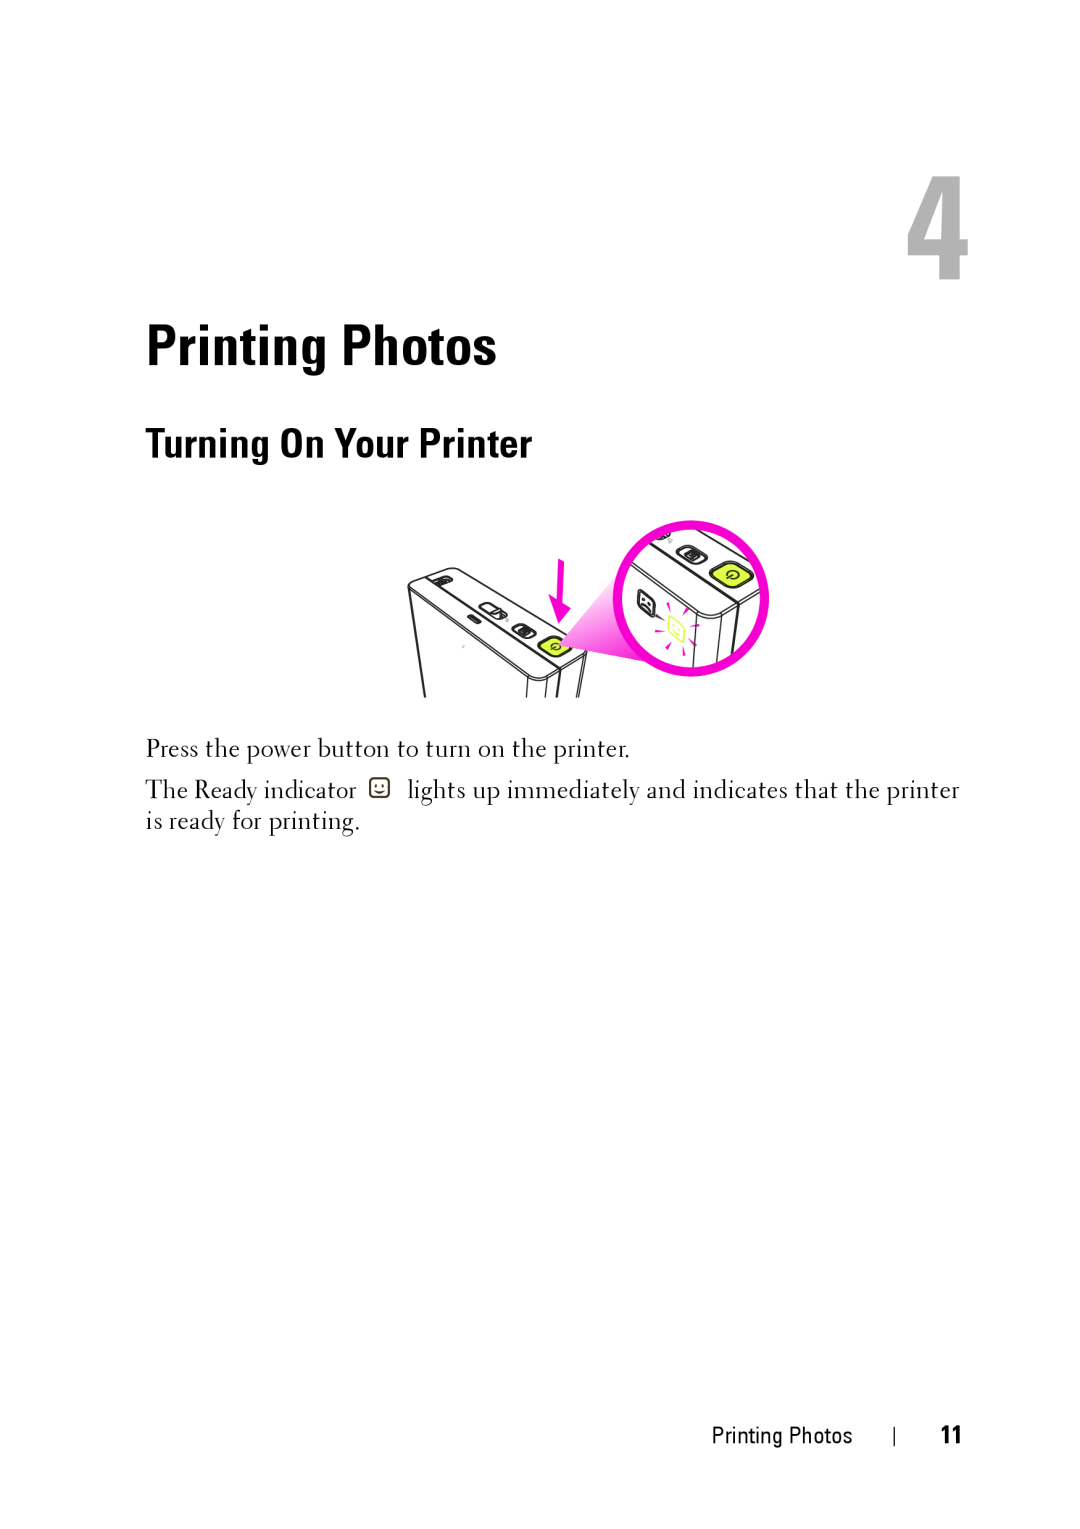 Dell PZ310 manual Printing Photos, Turning On Your Printer 